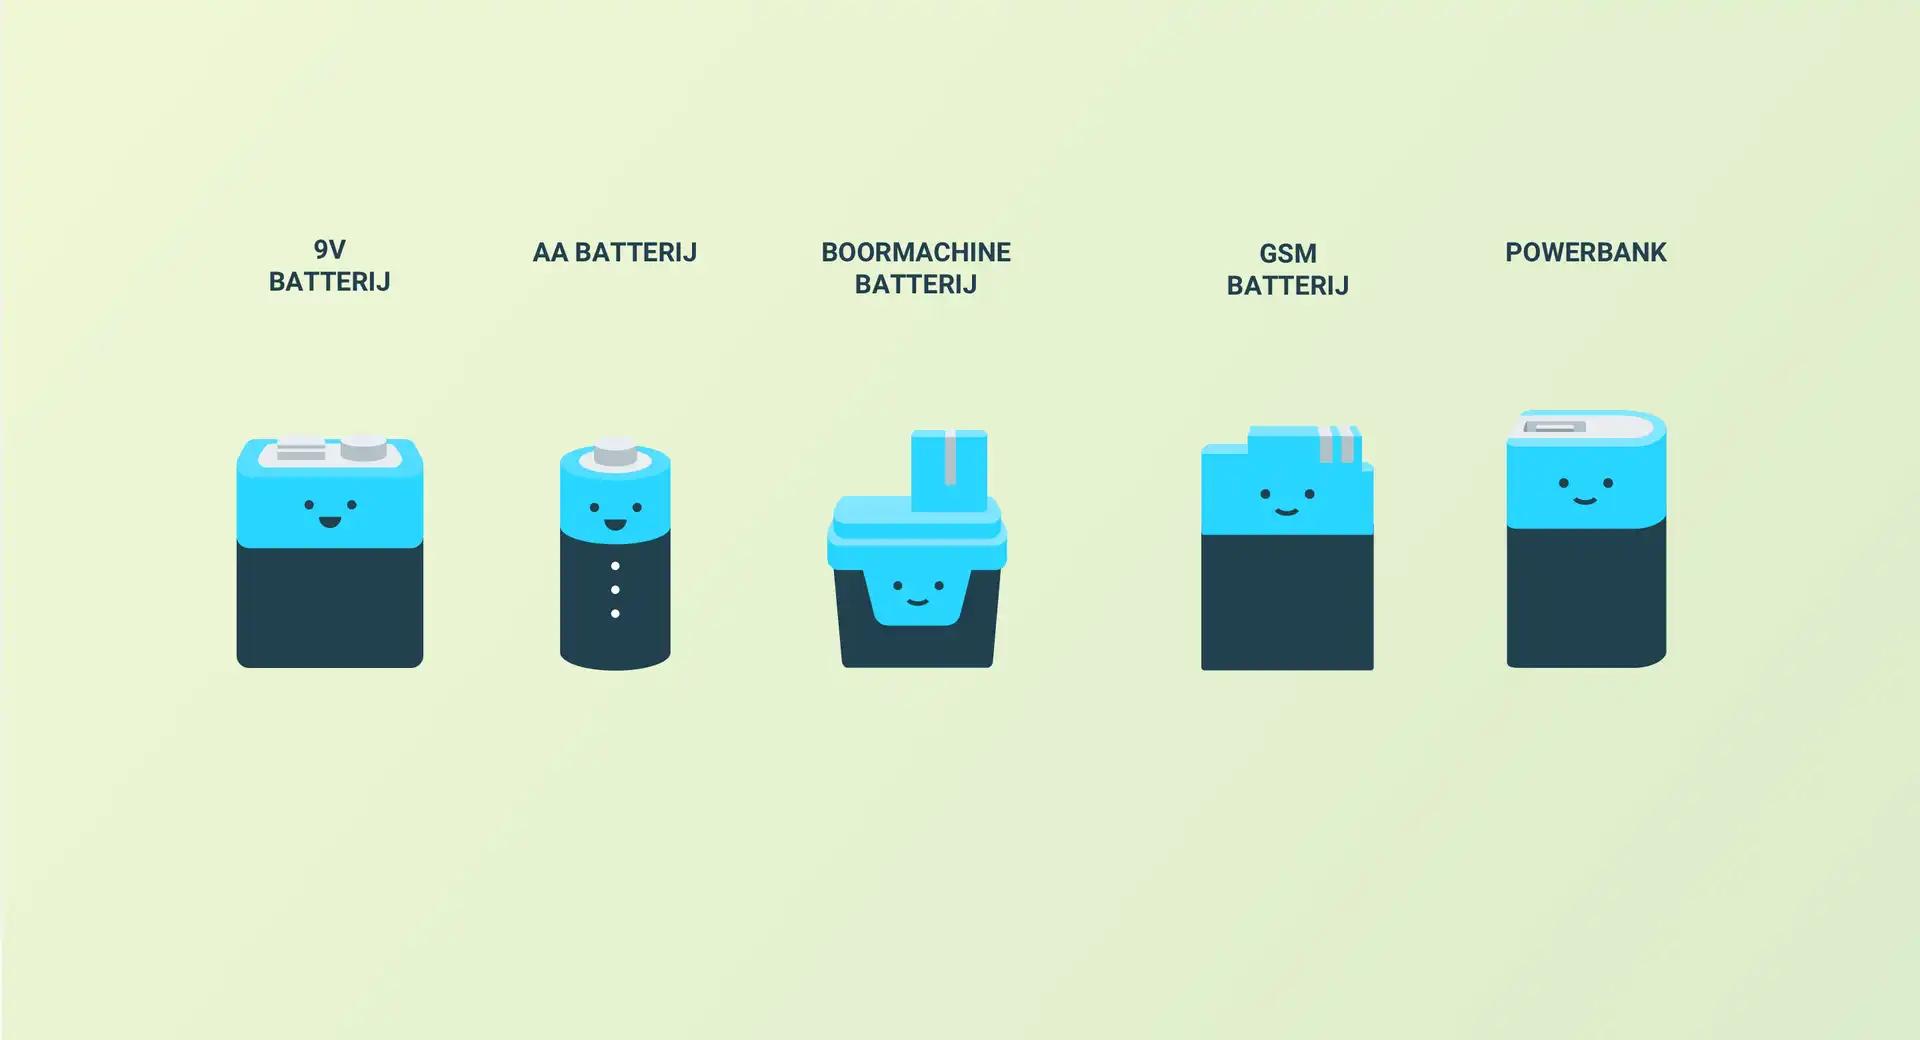 Overview of all types of batteries